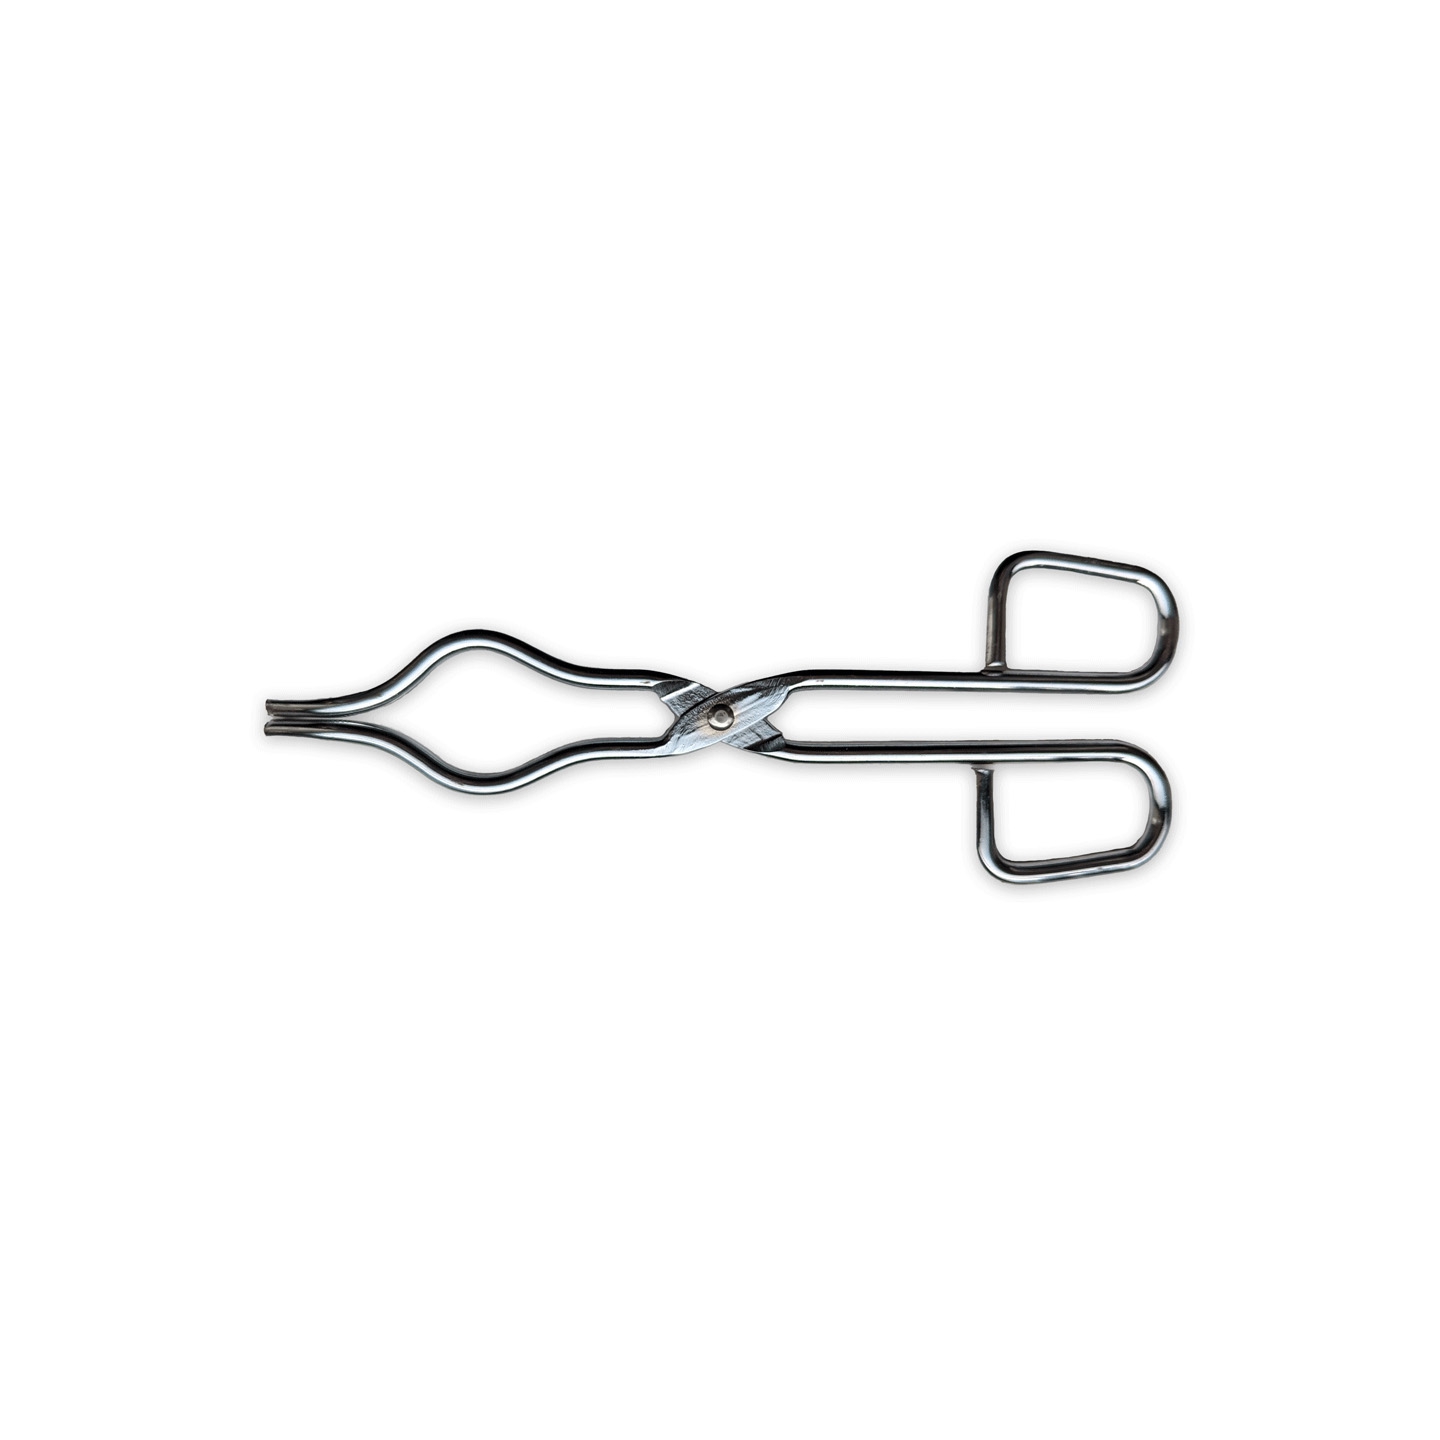 Crucible Tong, Plated Steel, Length 200mm, Straight Tips, Flat Hinge